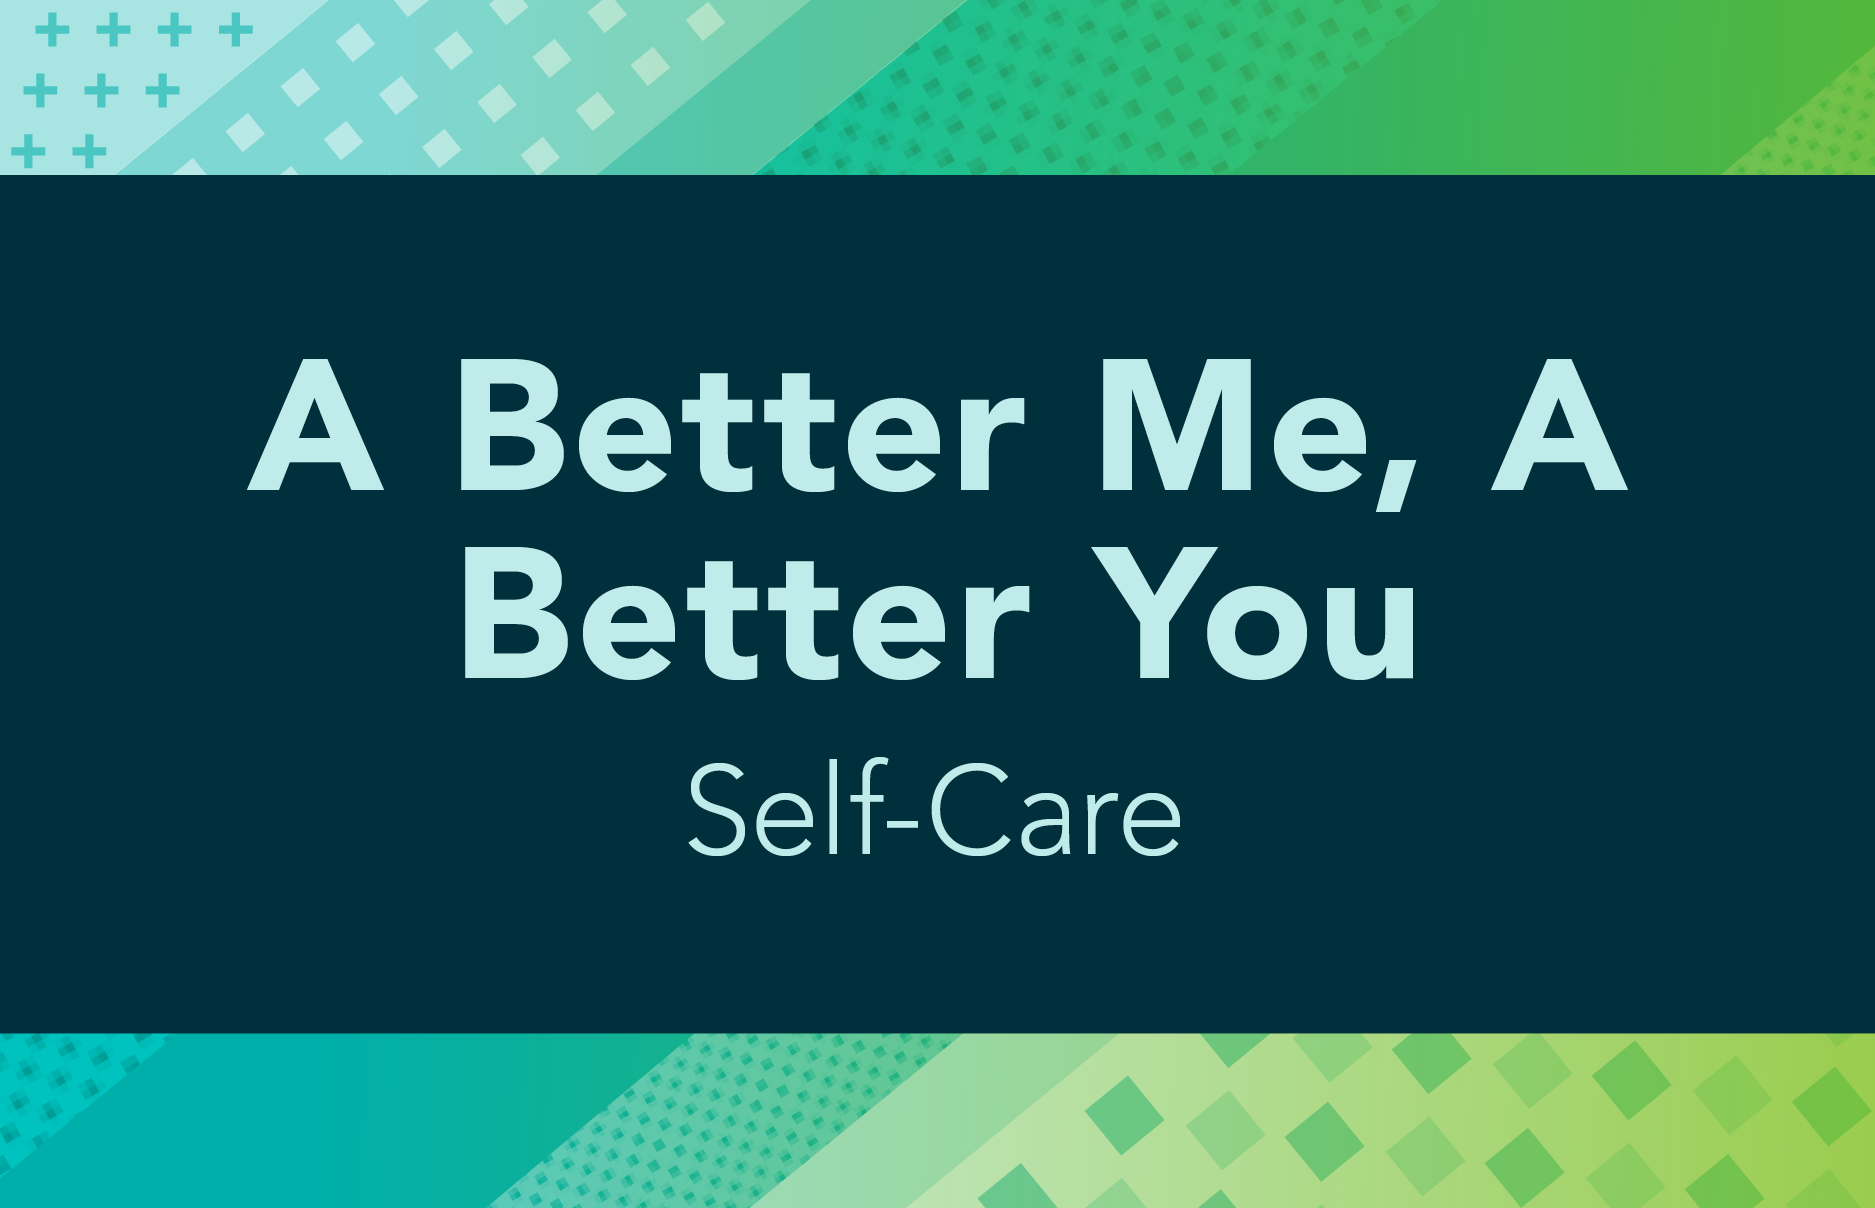 A Better Me A Better You Project Image: Self-Care for Individuals, Families, and Professionals